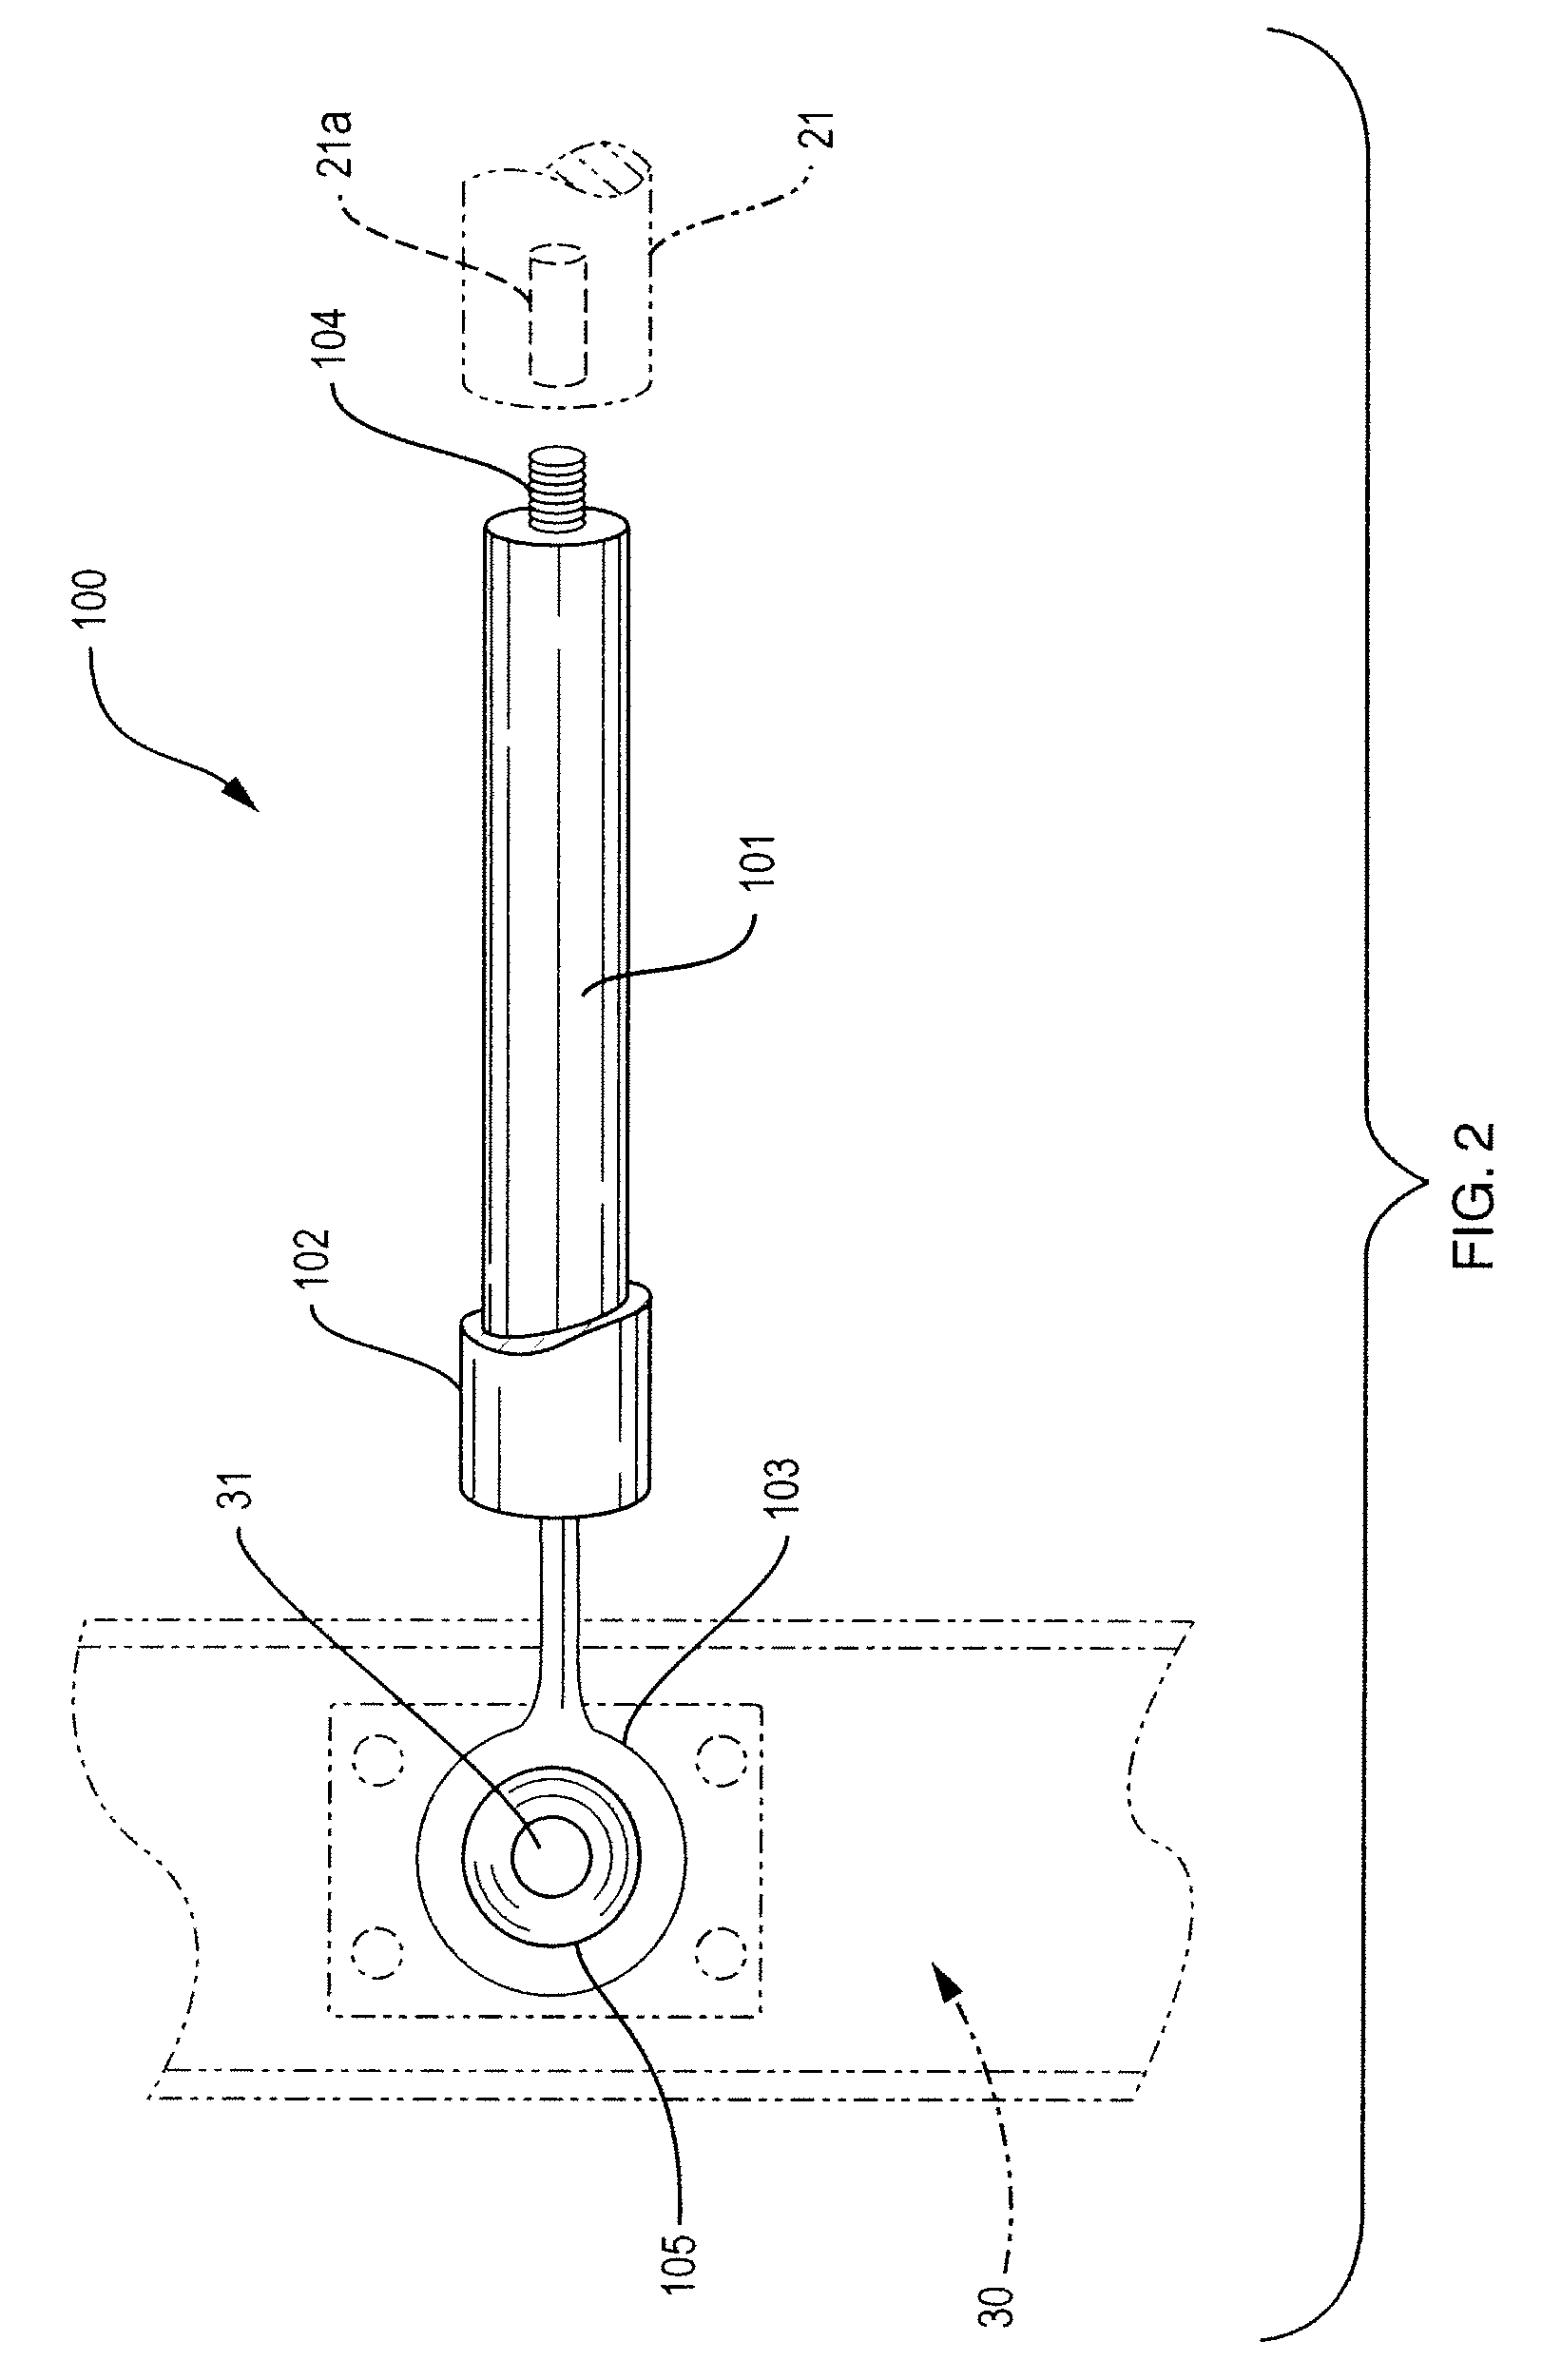 Apparatus for isolation of racehorse running motion from a sulky cart